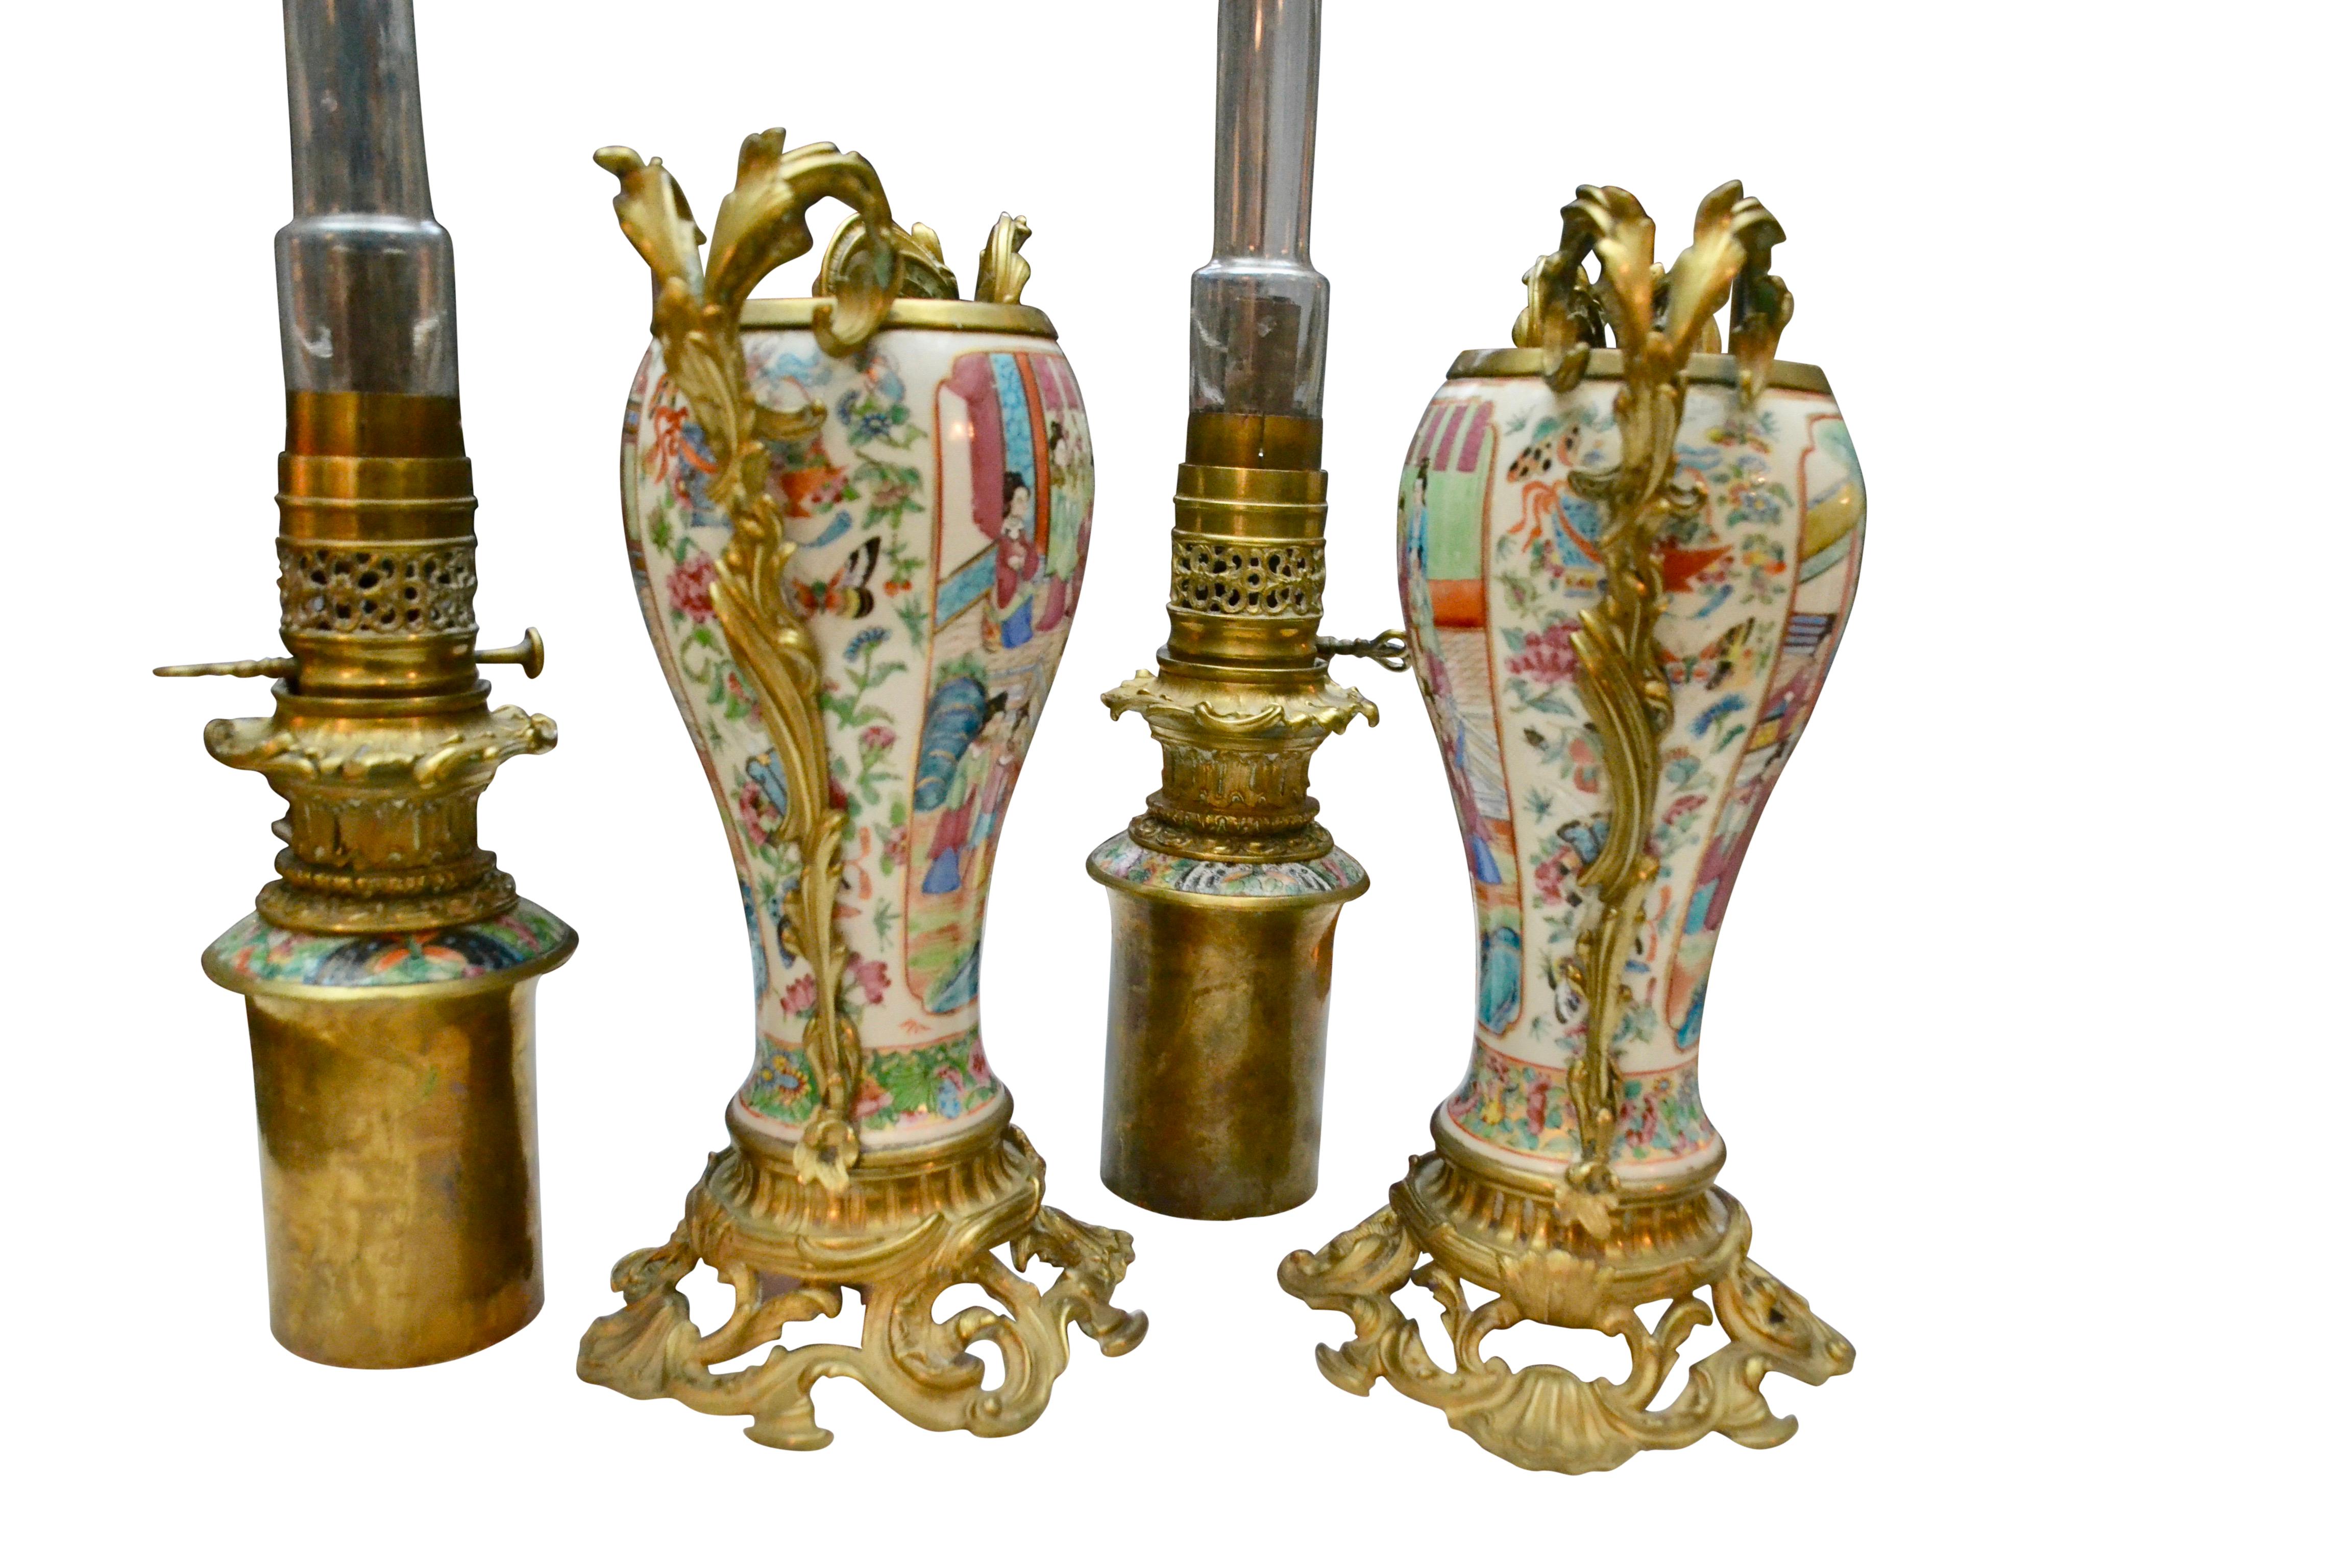 Gilt Rare Pair of  Famille Rose Porcelain and Ormolu Napoleon III Oil Lamps